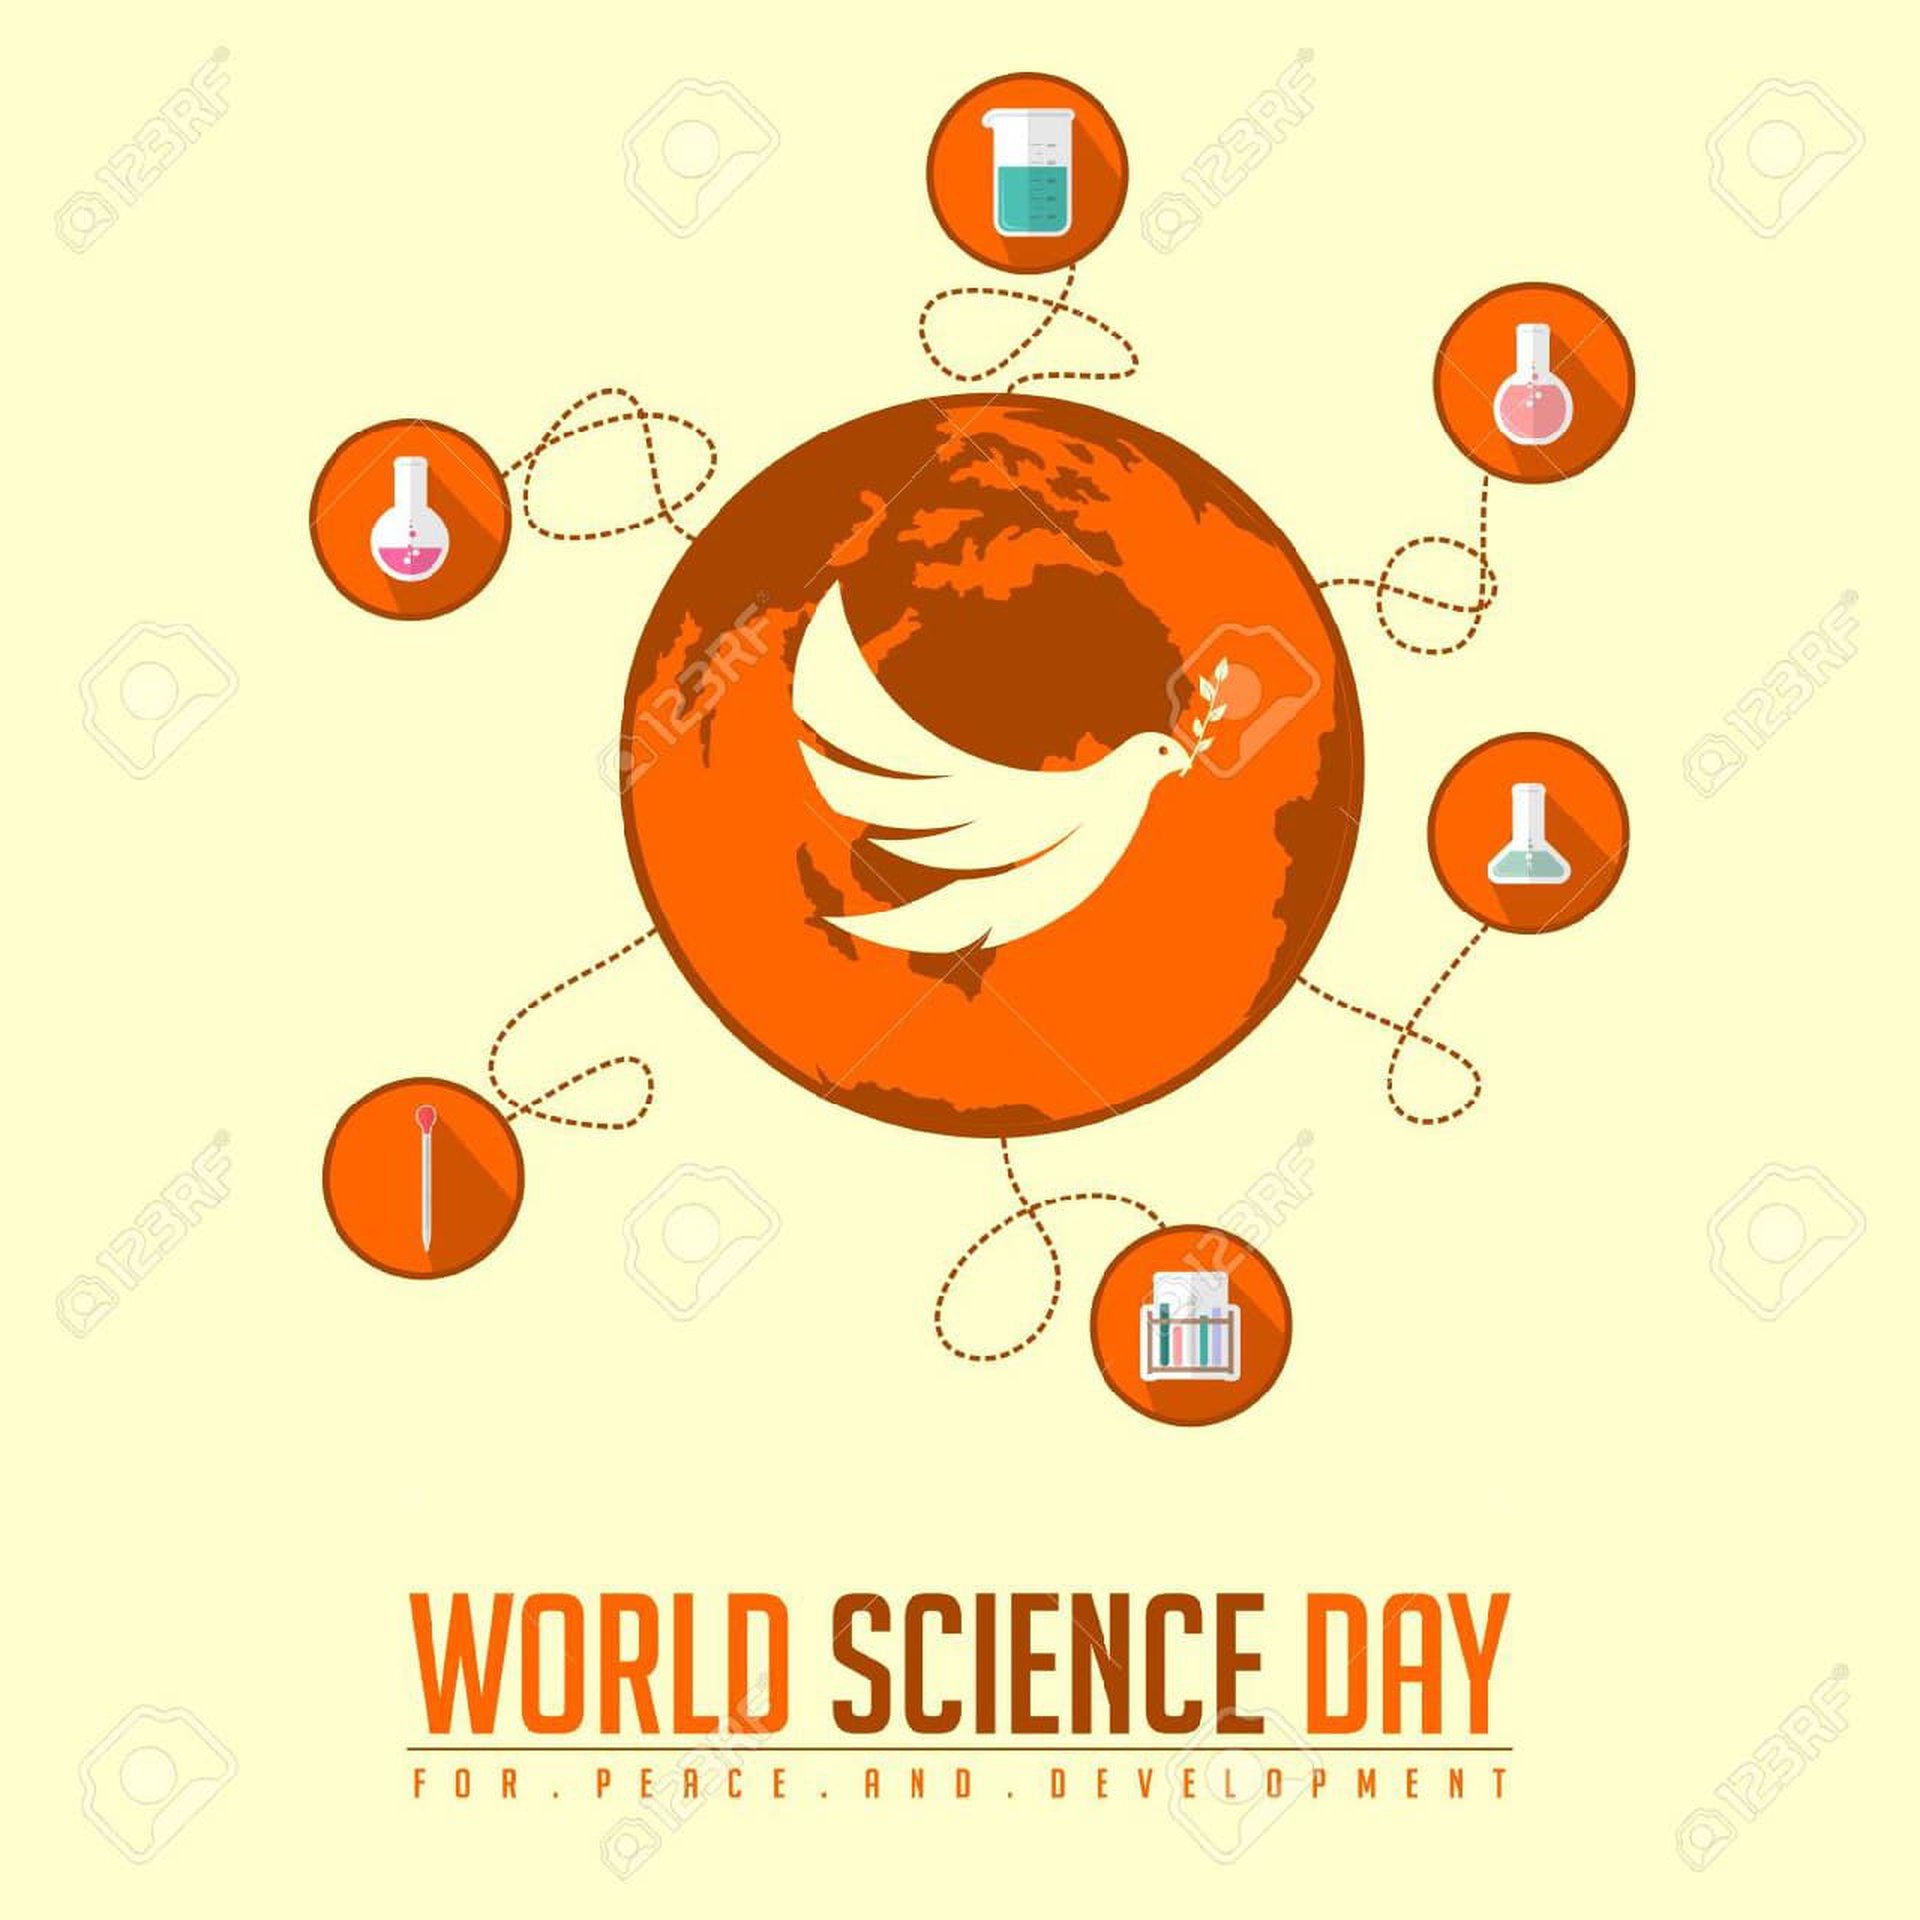 Happy World Science Day for Peace and Development!